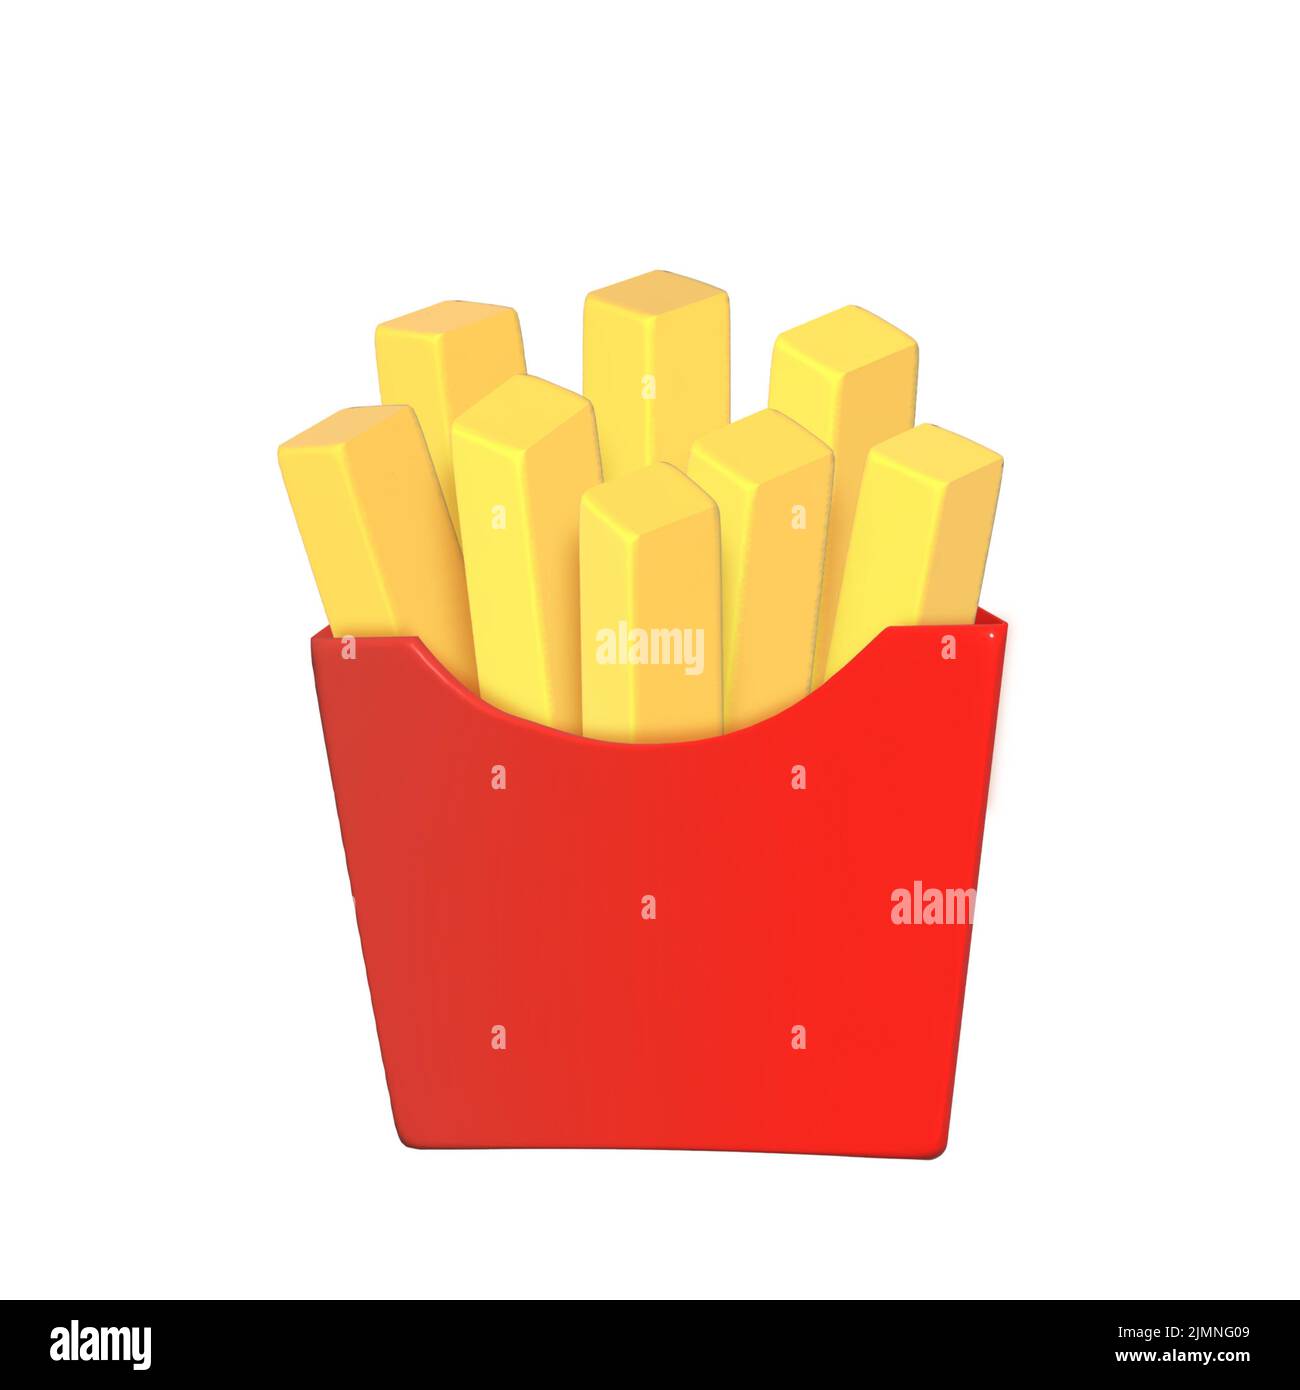 French fries pack box. Cartoon fast food fry potato 3d render icon mock up on white background. Stock Photo